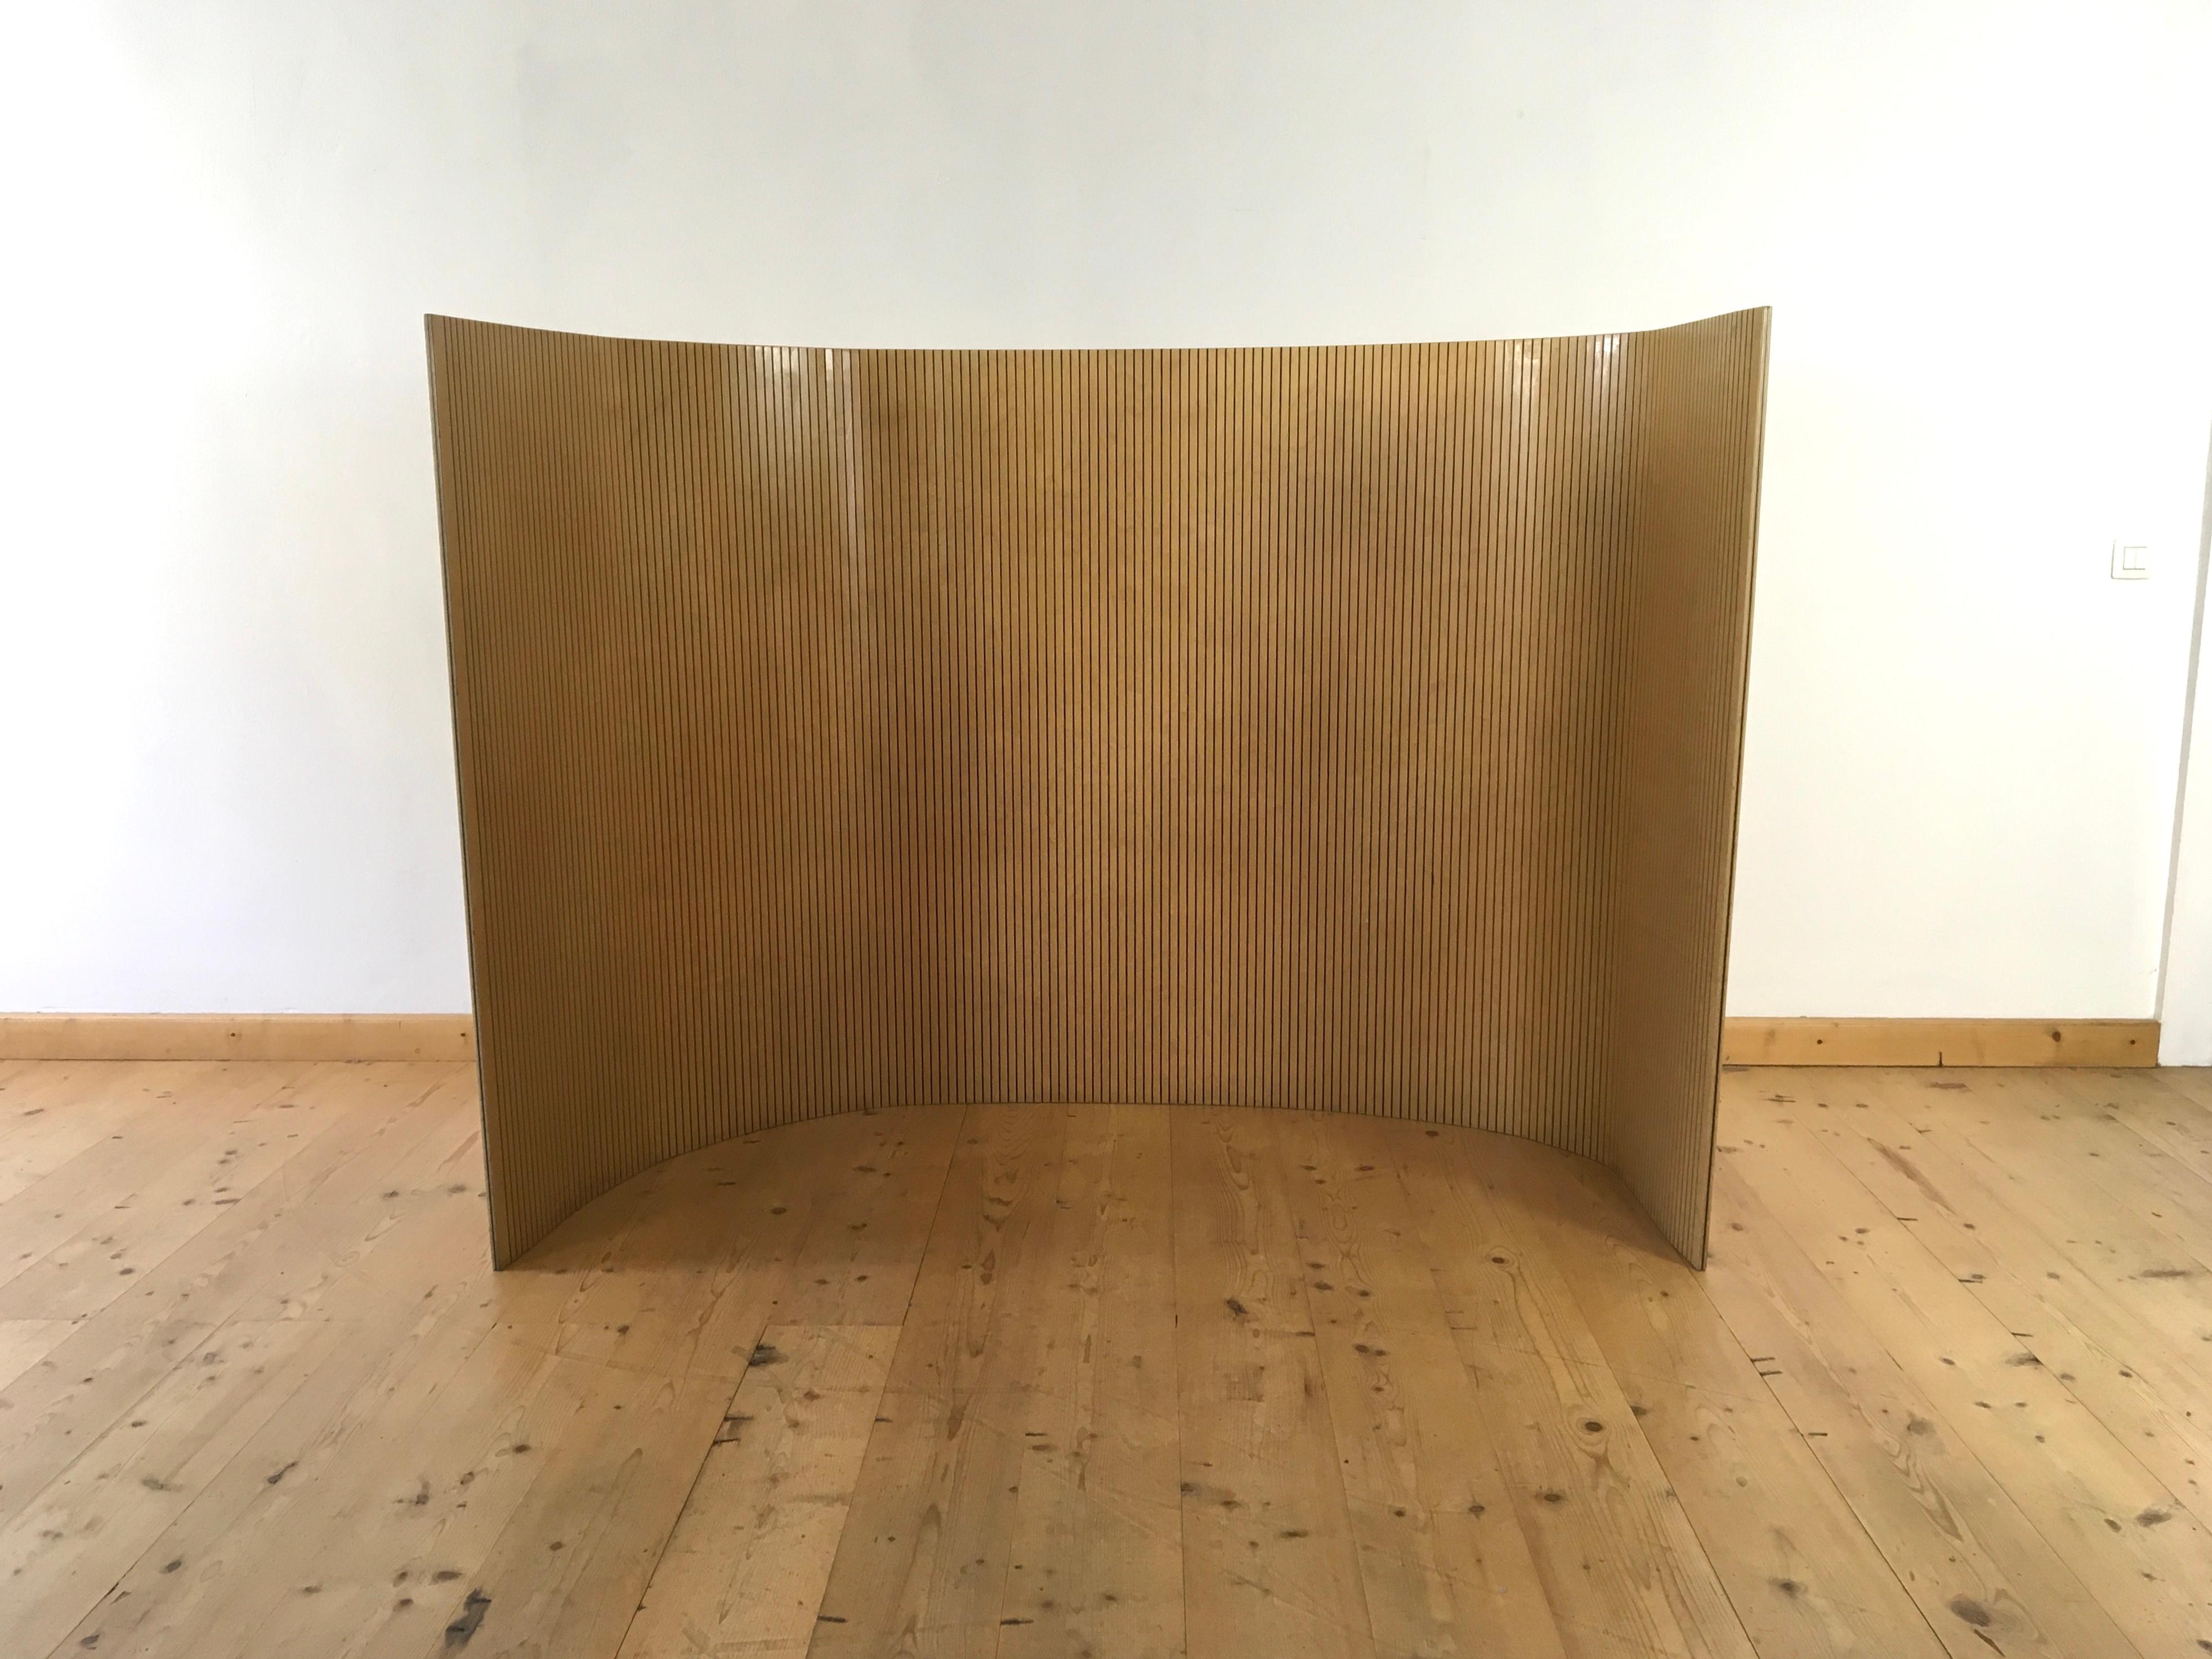 Lacquered Vintage Flexible Wooden Room Divider, Screen, Finland